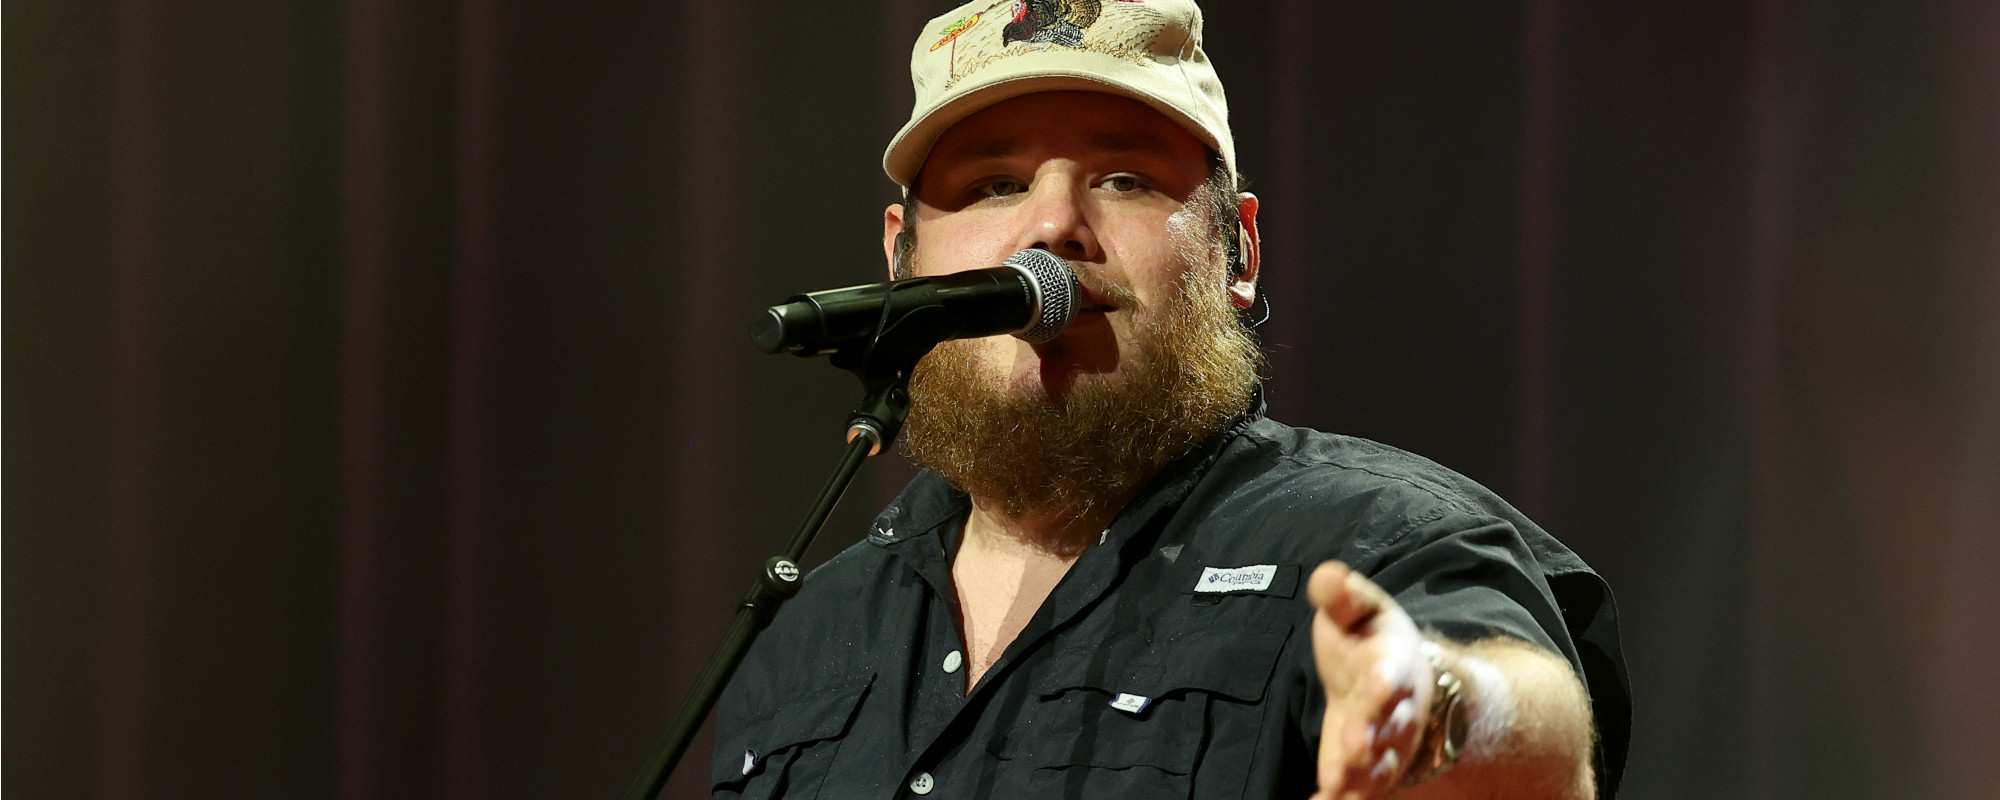 Luke Combs Unloads on Panthers Owner David Tepper: “It Ain’t Happening”